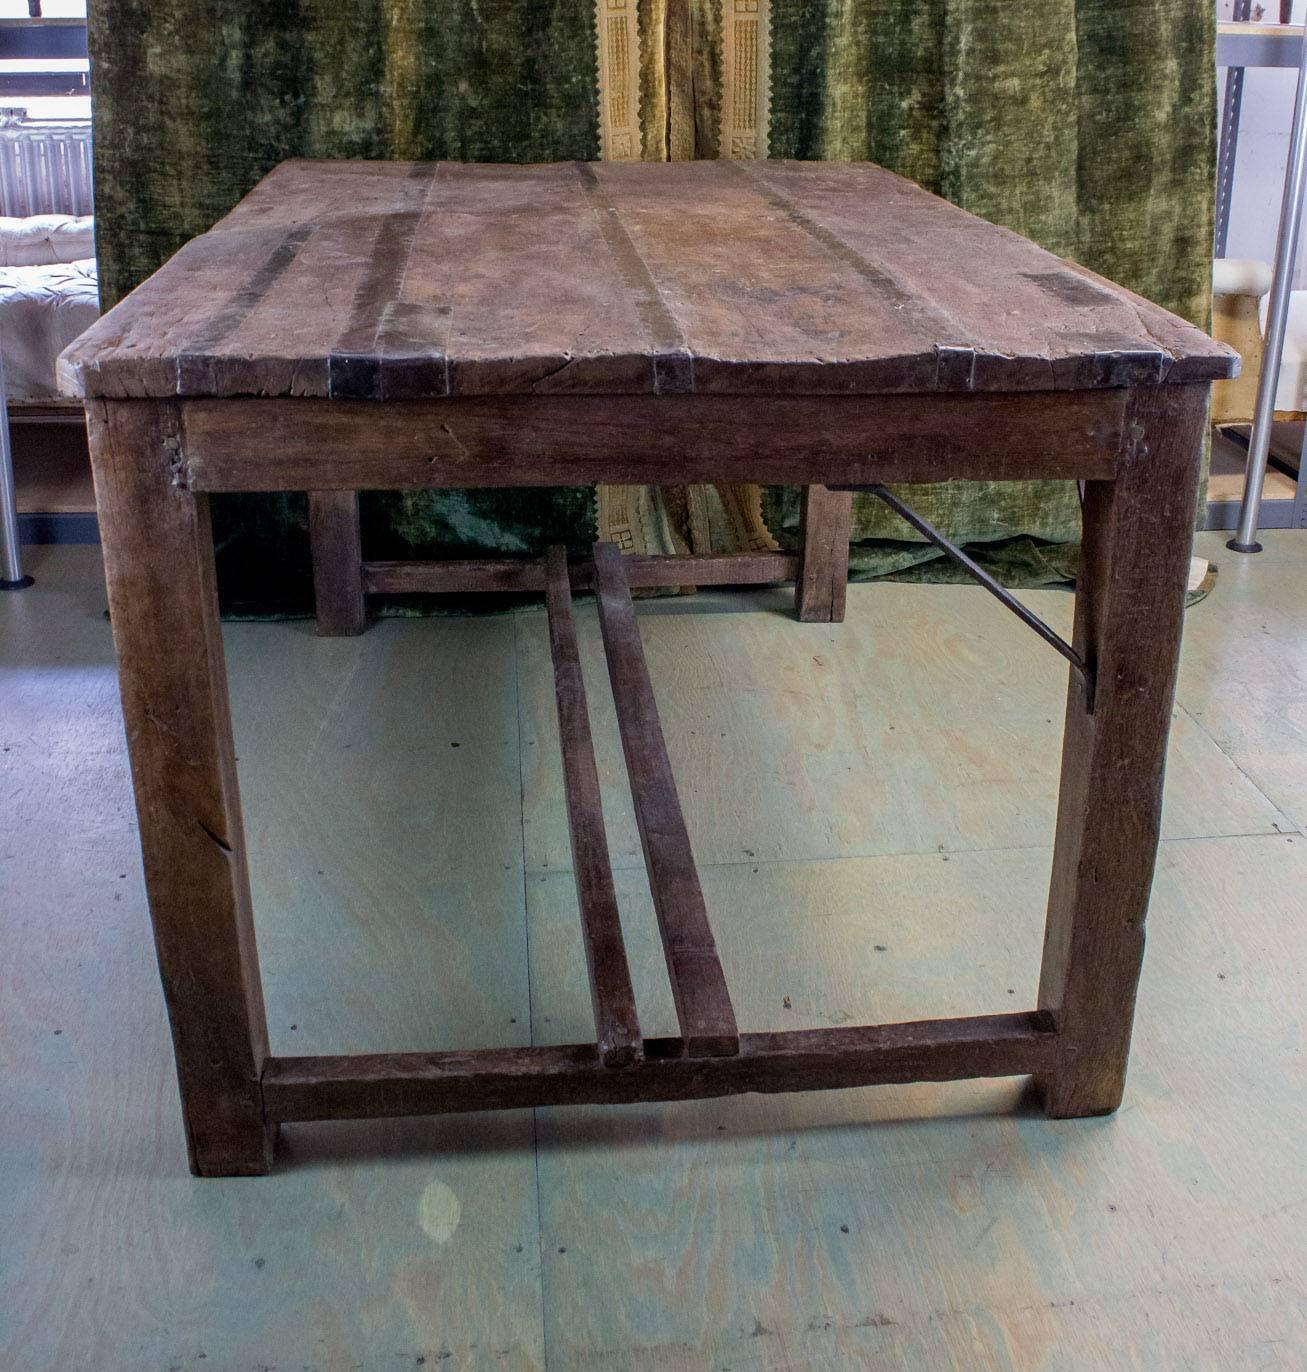 large work table